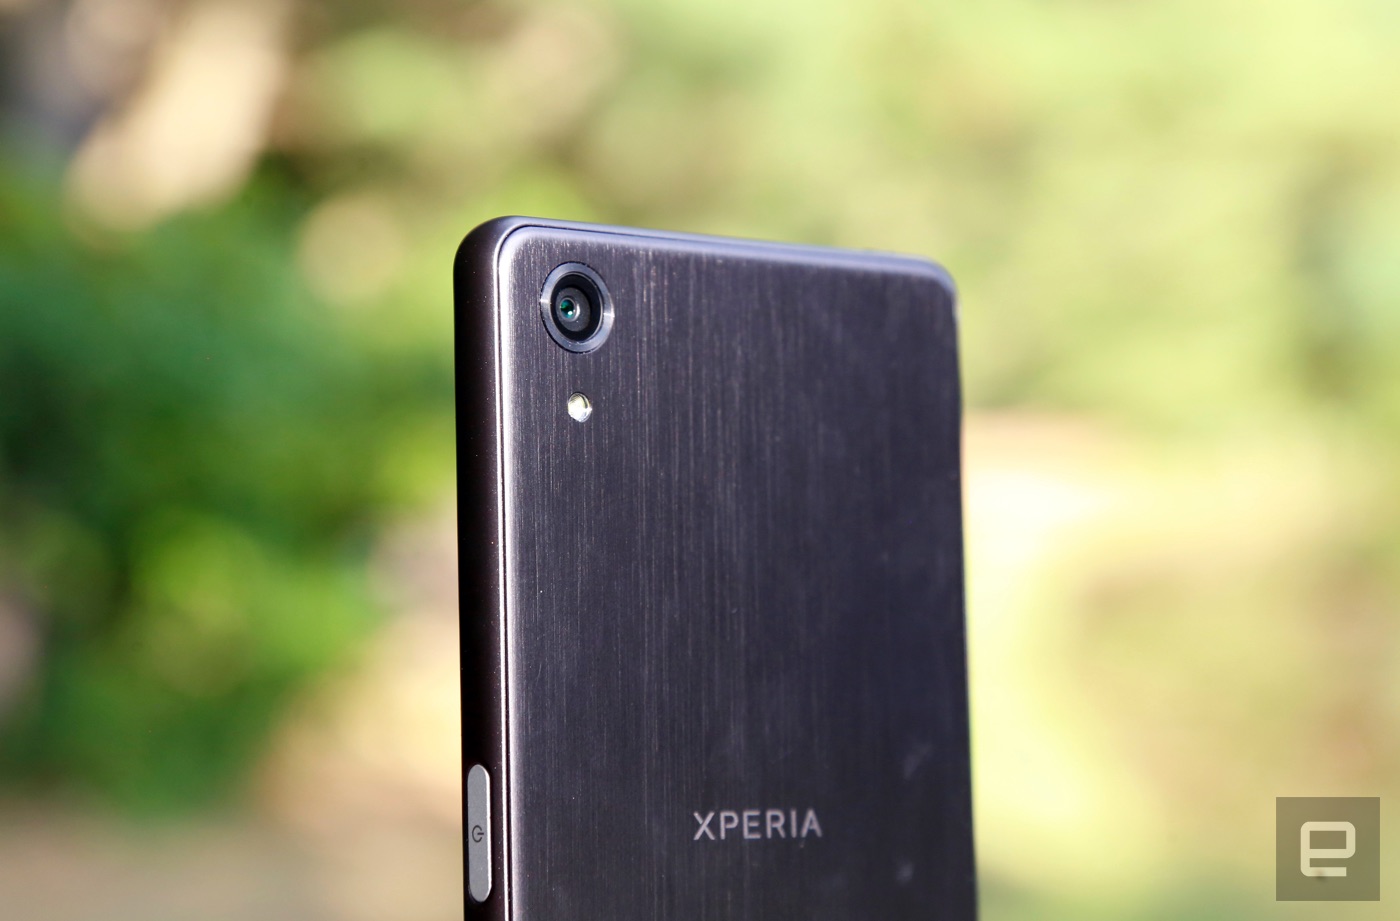 Sony Xperia X Performance review: $700 disappointment | Engadget